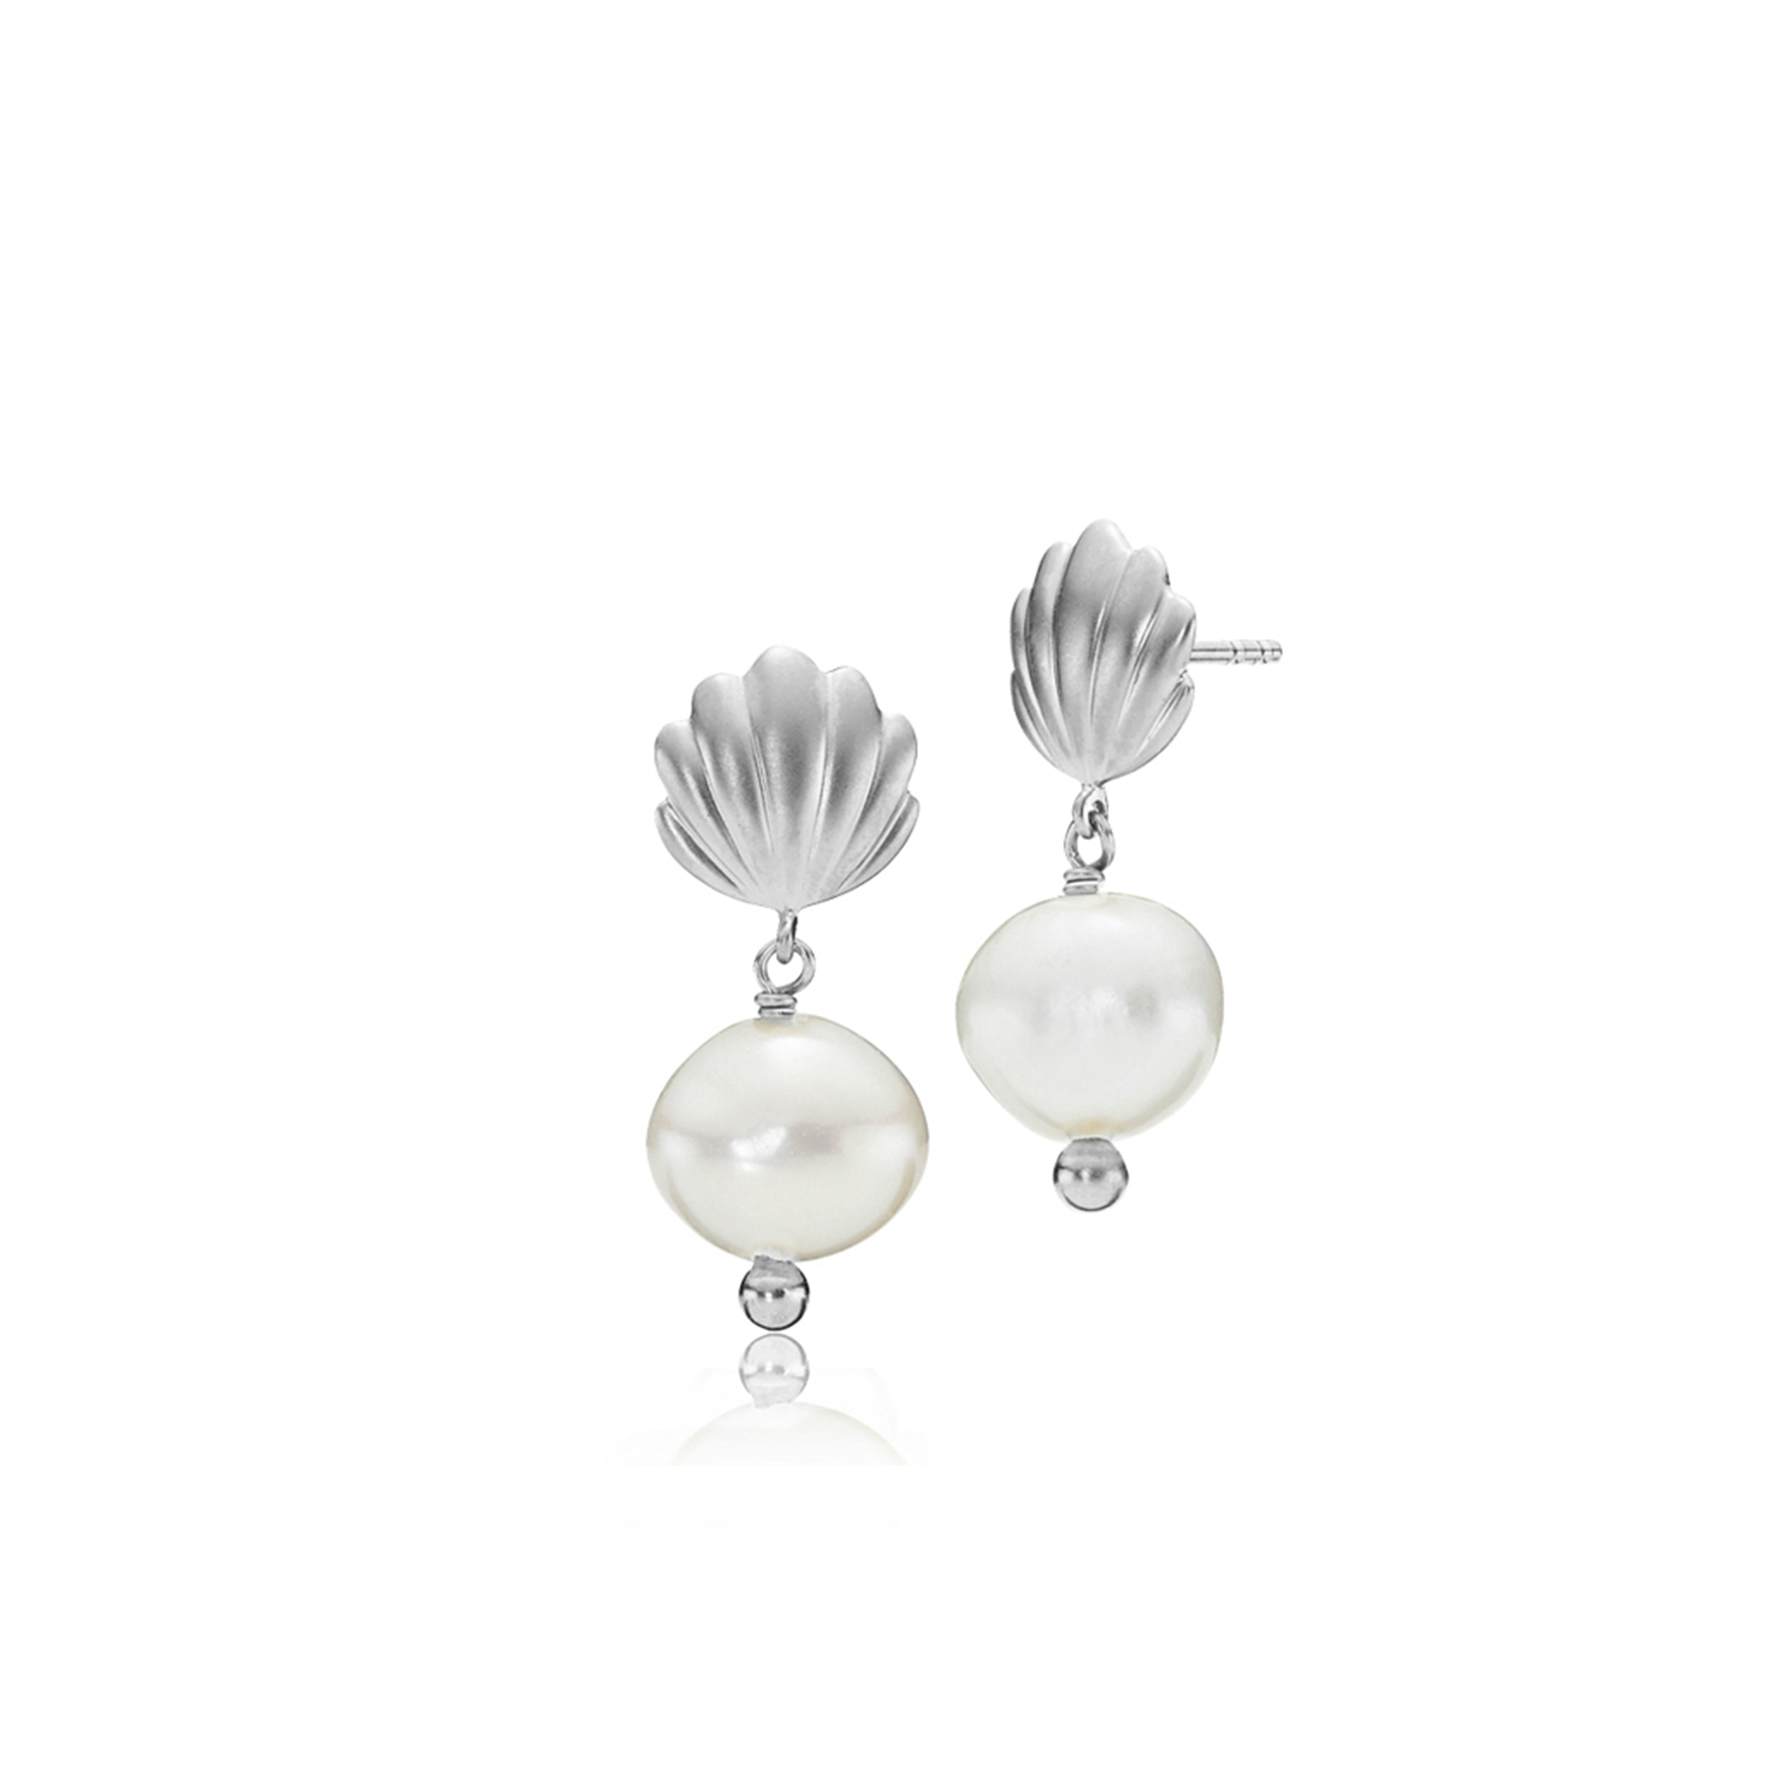 Isabella White Earrings from Izabel Camille in Silver Sterling 925|Freshwater Pearl